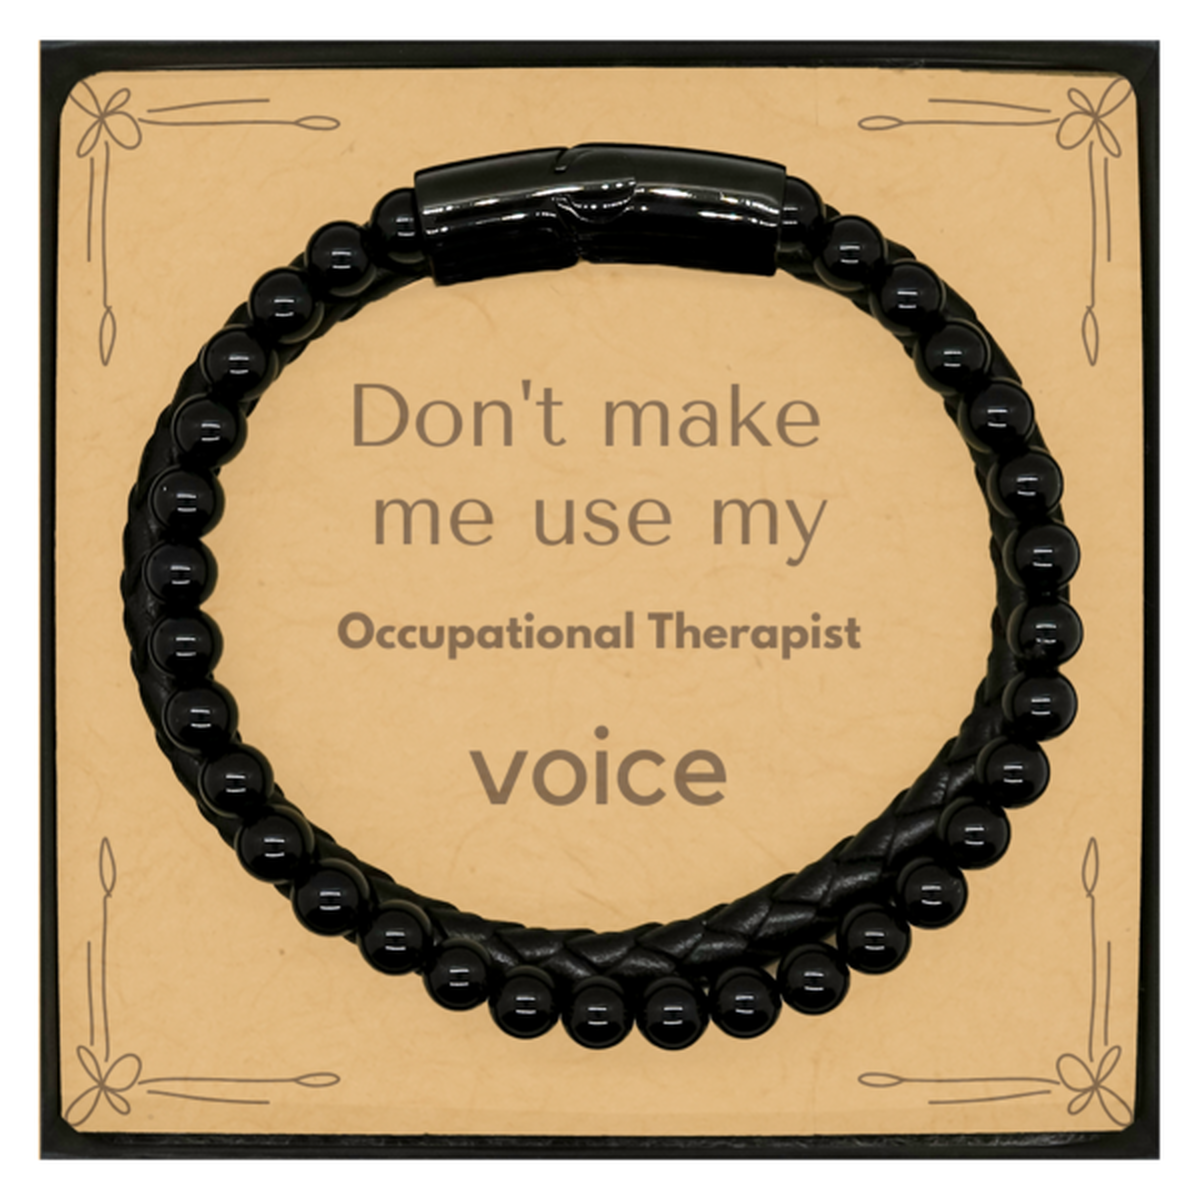 Don't make me use my Occupational Therapist voice, Sarcasm Occupational Therapist Card Gifts, Christmas Occupational Therapist Stone Leather Bracelets Birthday Unique Gifts For Occupational Therapist Coworkers, Men, Women, Colleague, Friends